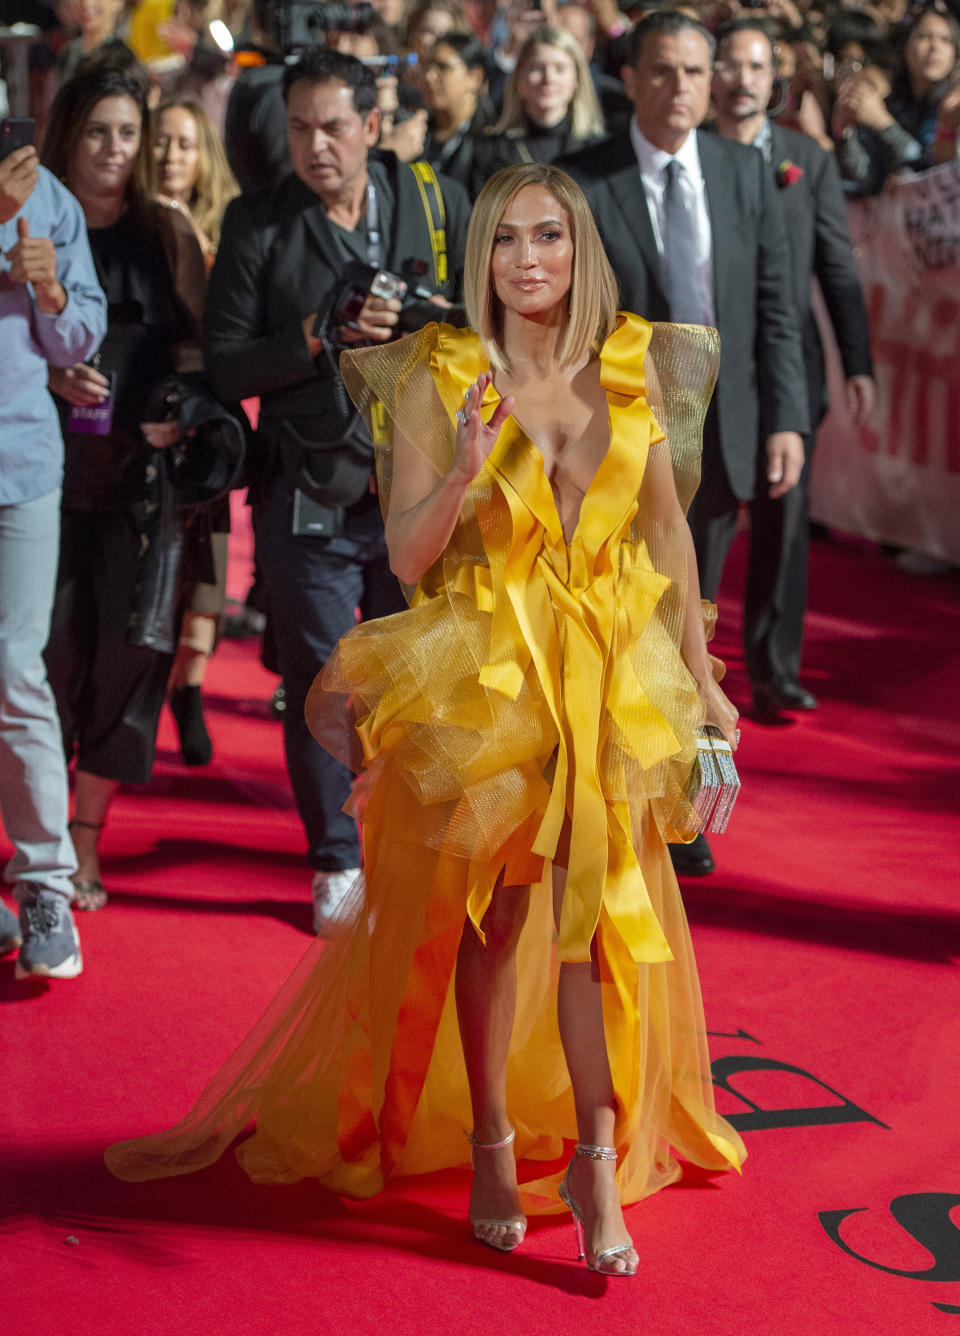 Actress Jennifer Lopez arrives for the Gala Premiere of the film "Hustlers" at the 2019 Toronto International Film Festival in Toronto, on Saturday, Sept. 7, 2019. (Frank Gunn/The Canadian Press via AP)